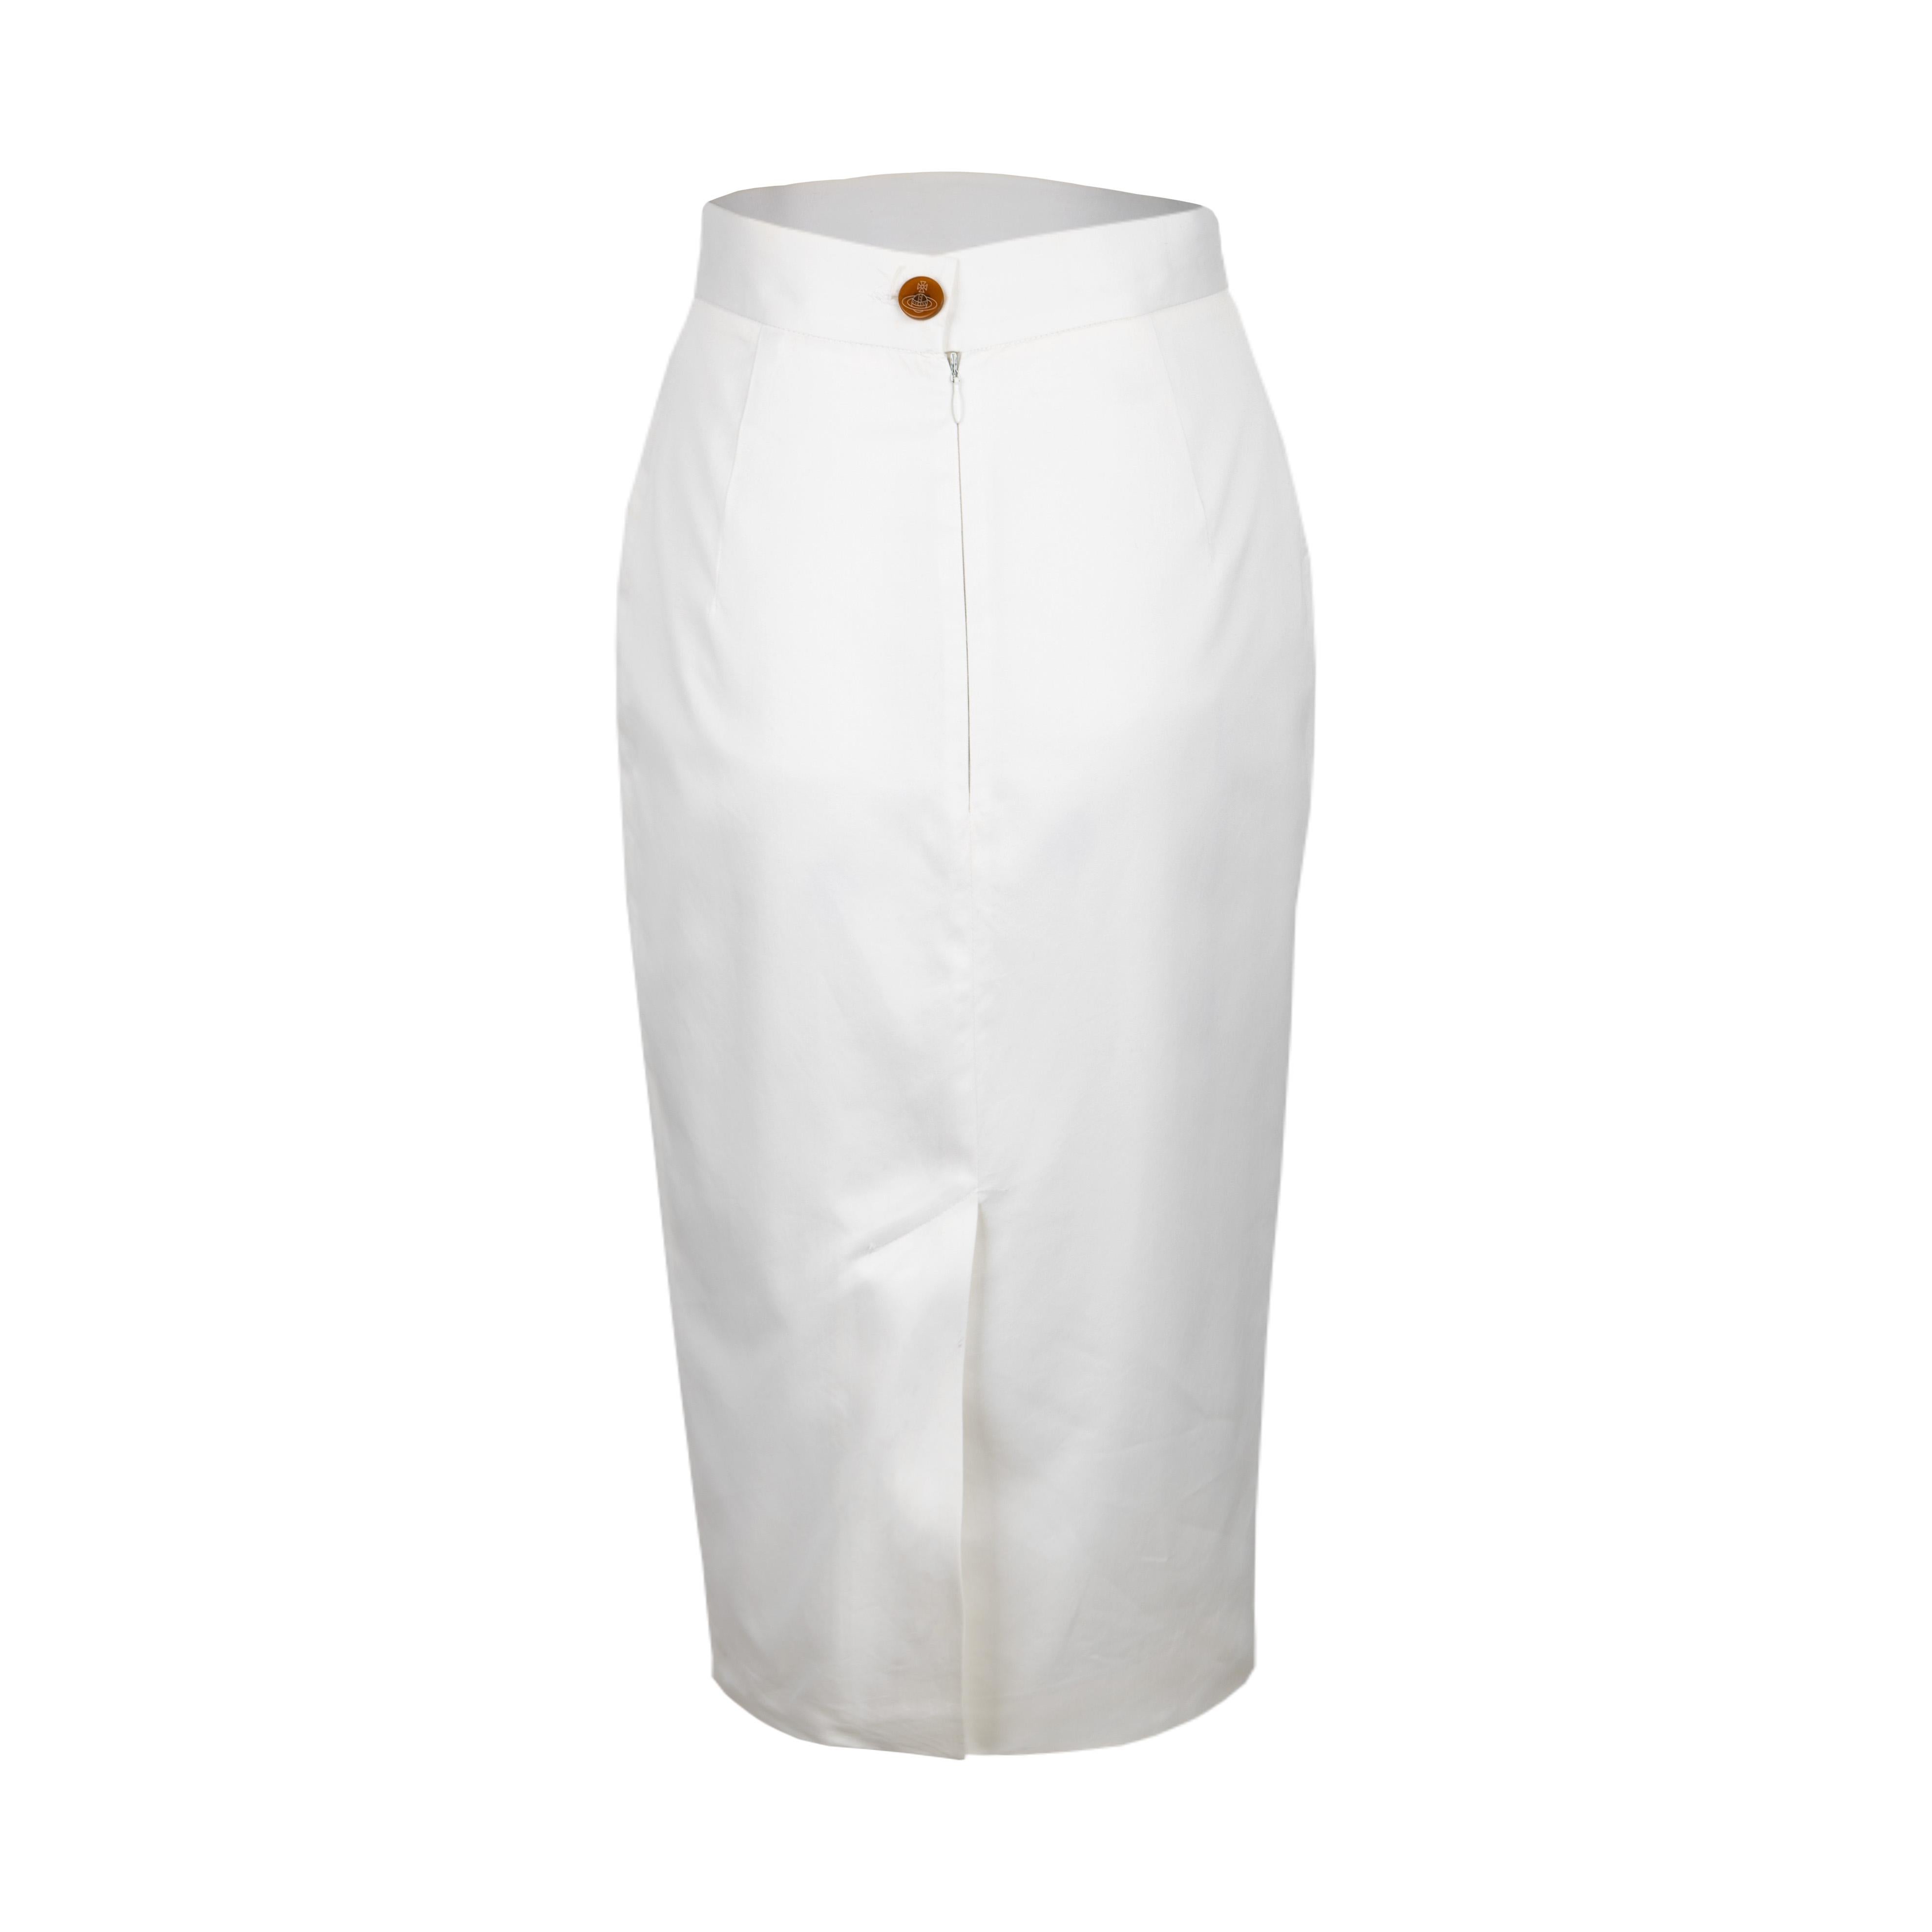 Vivienne Westwood White Cotton Skirt and Jacket Set - '10s 5